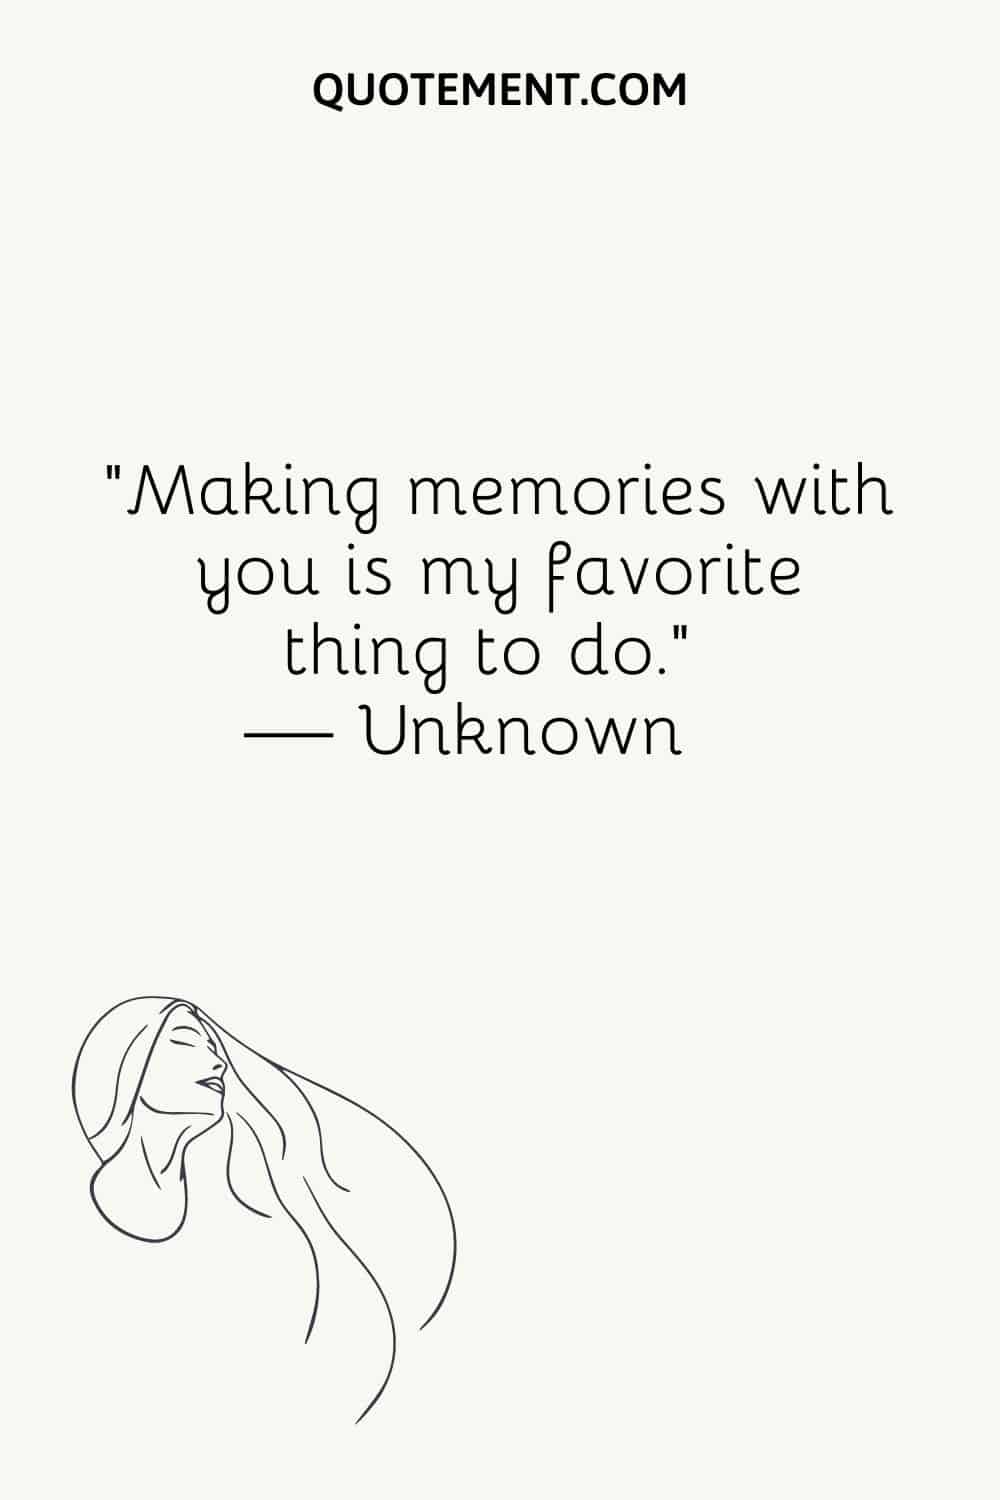 “Making memories with you is my favorite thing to do.” — unknown